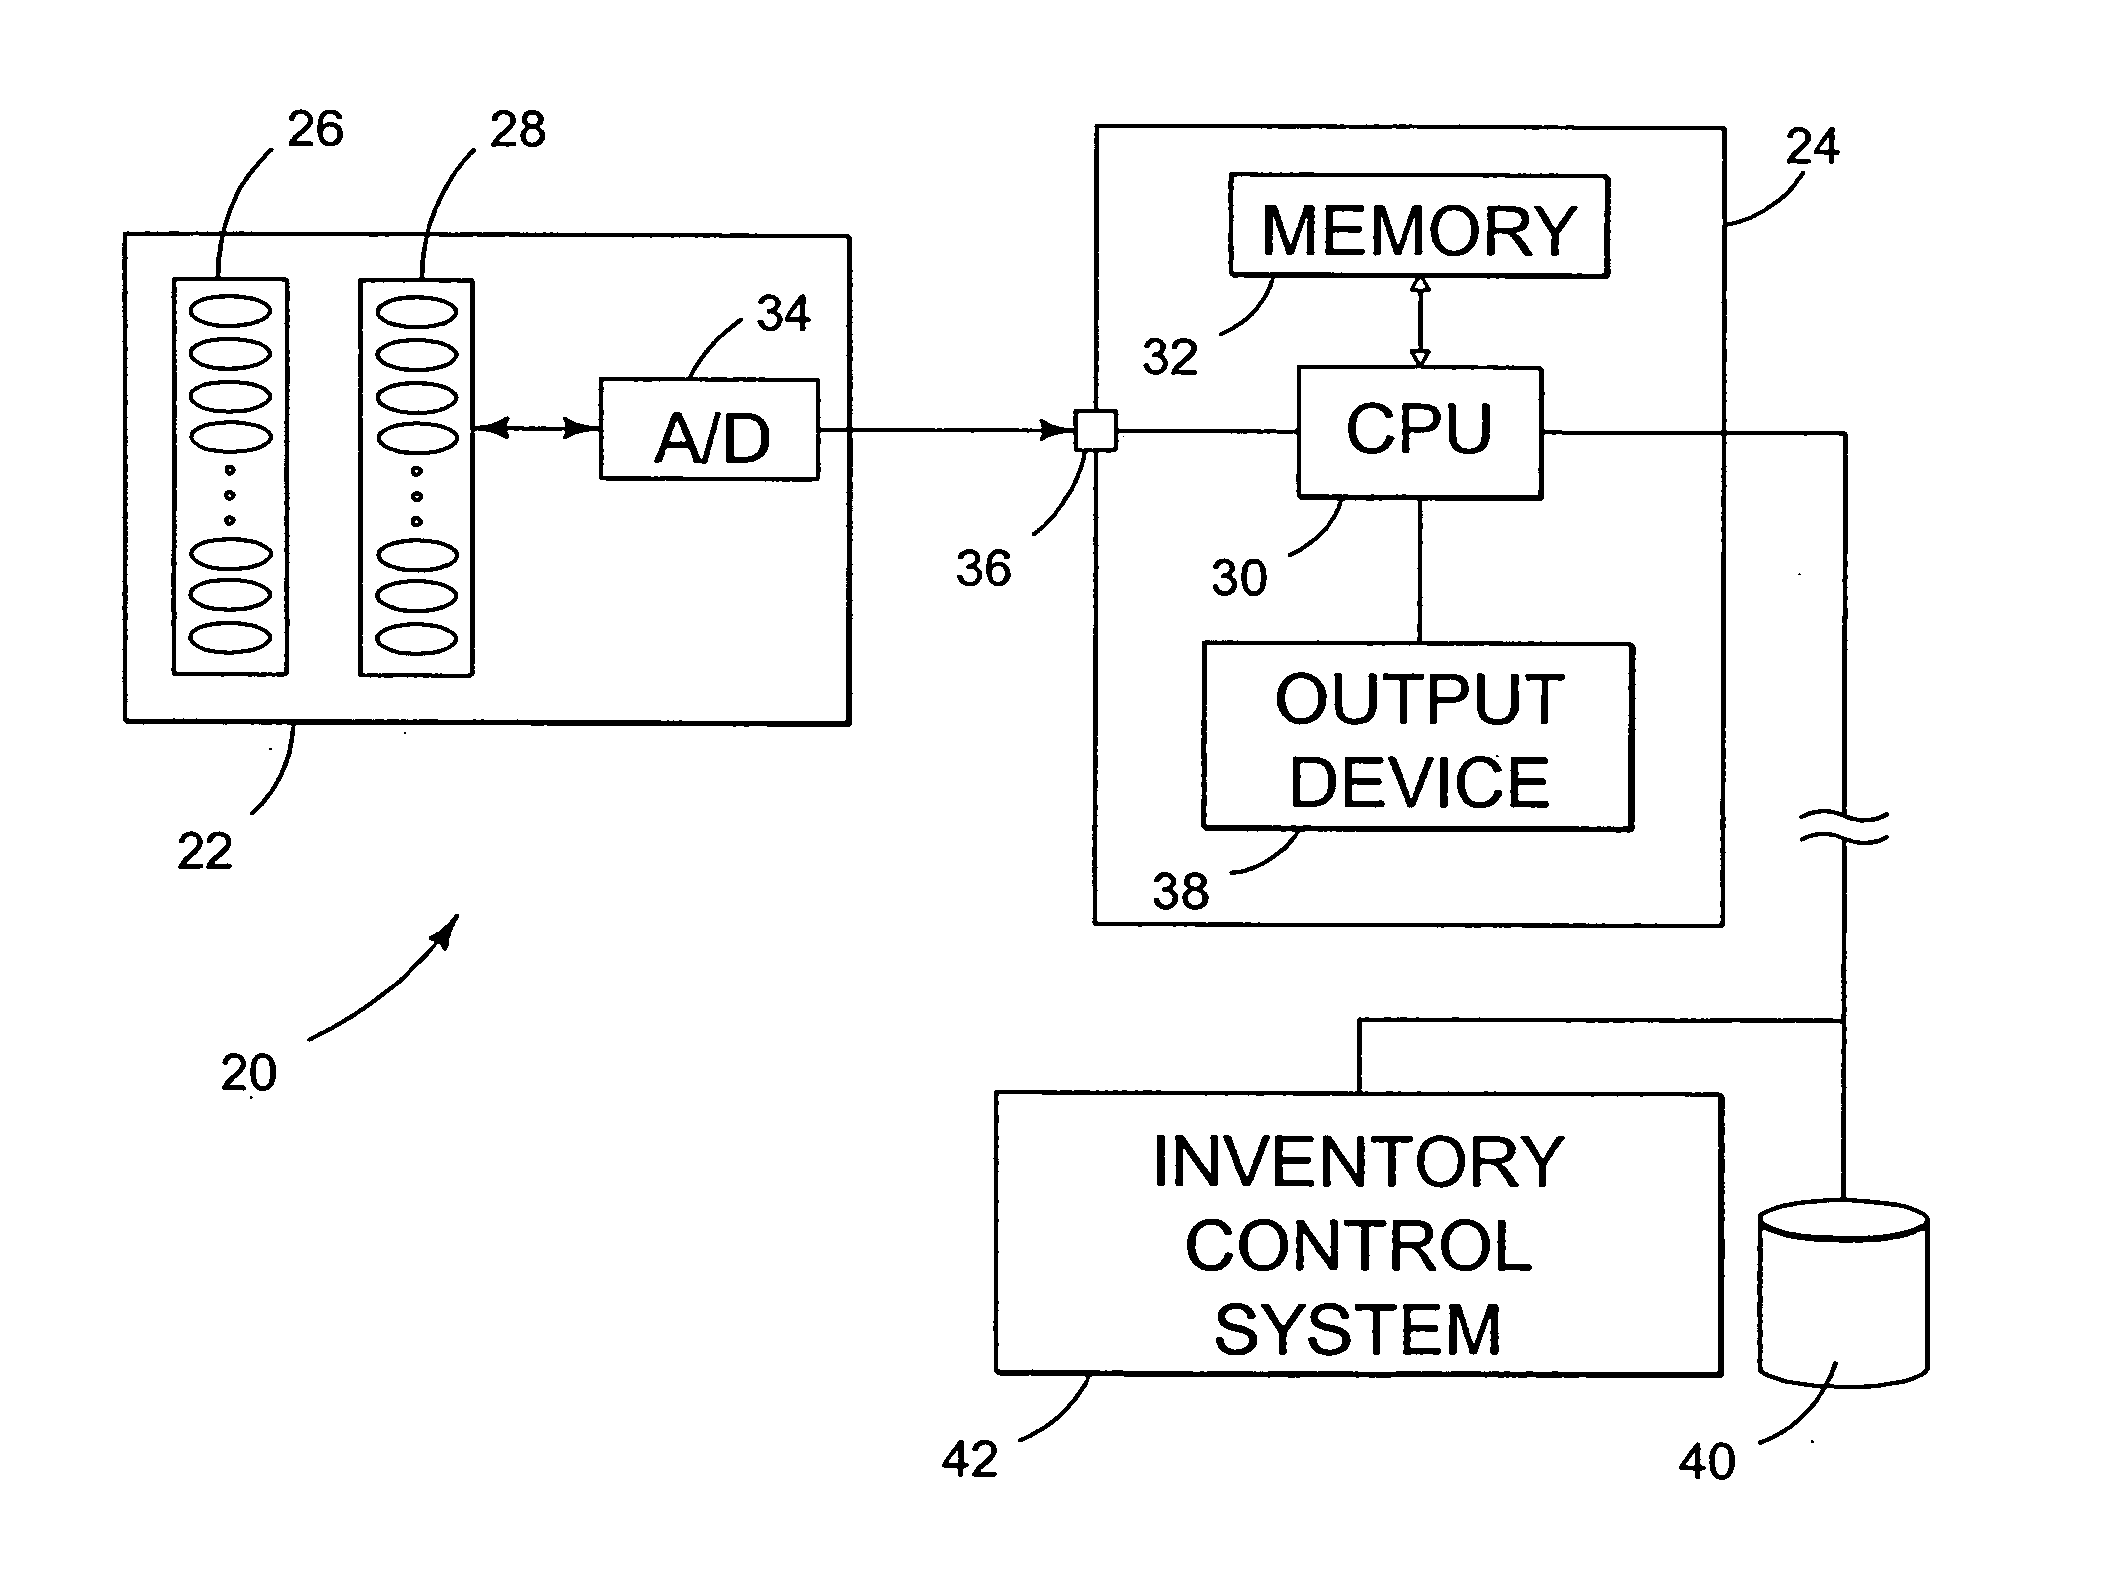 Methods and tangible objects employing textured machine readable data